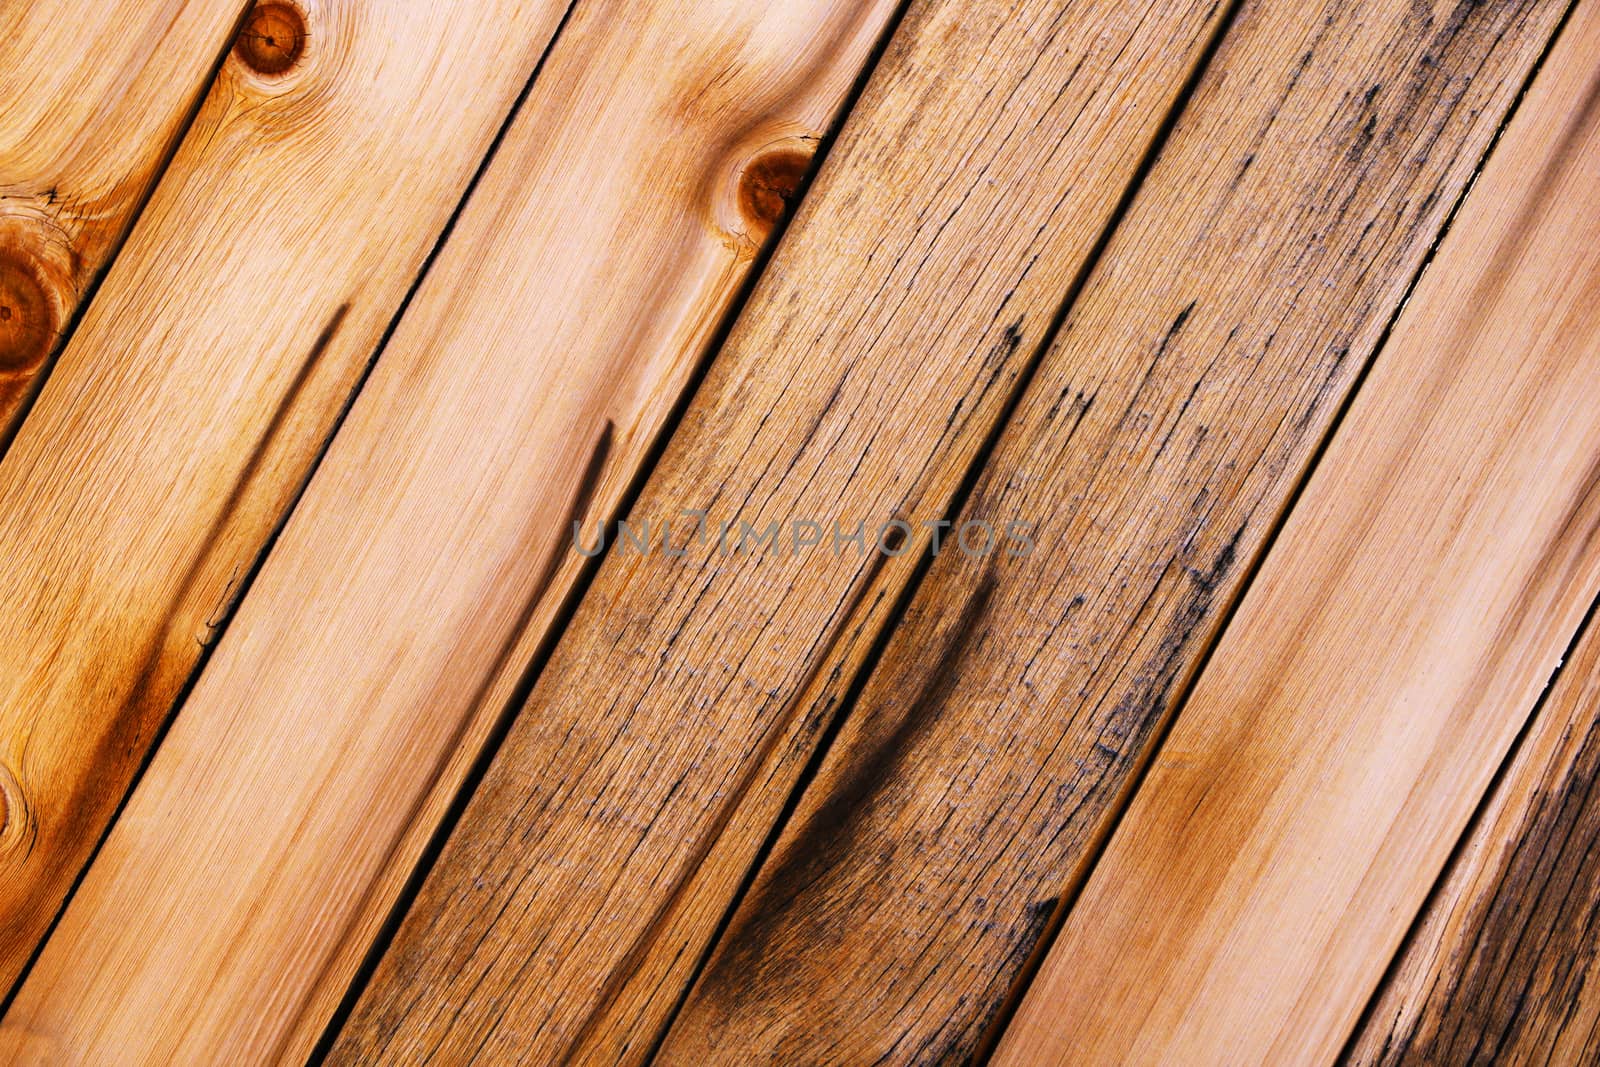 Old natural wooden texture used as background by kip02kas